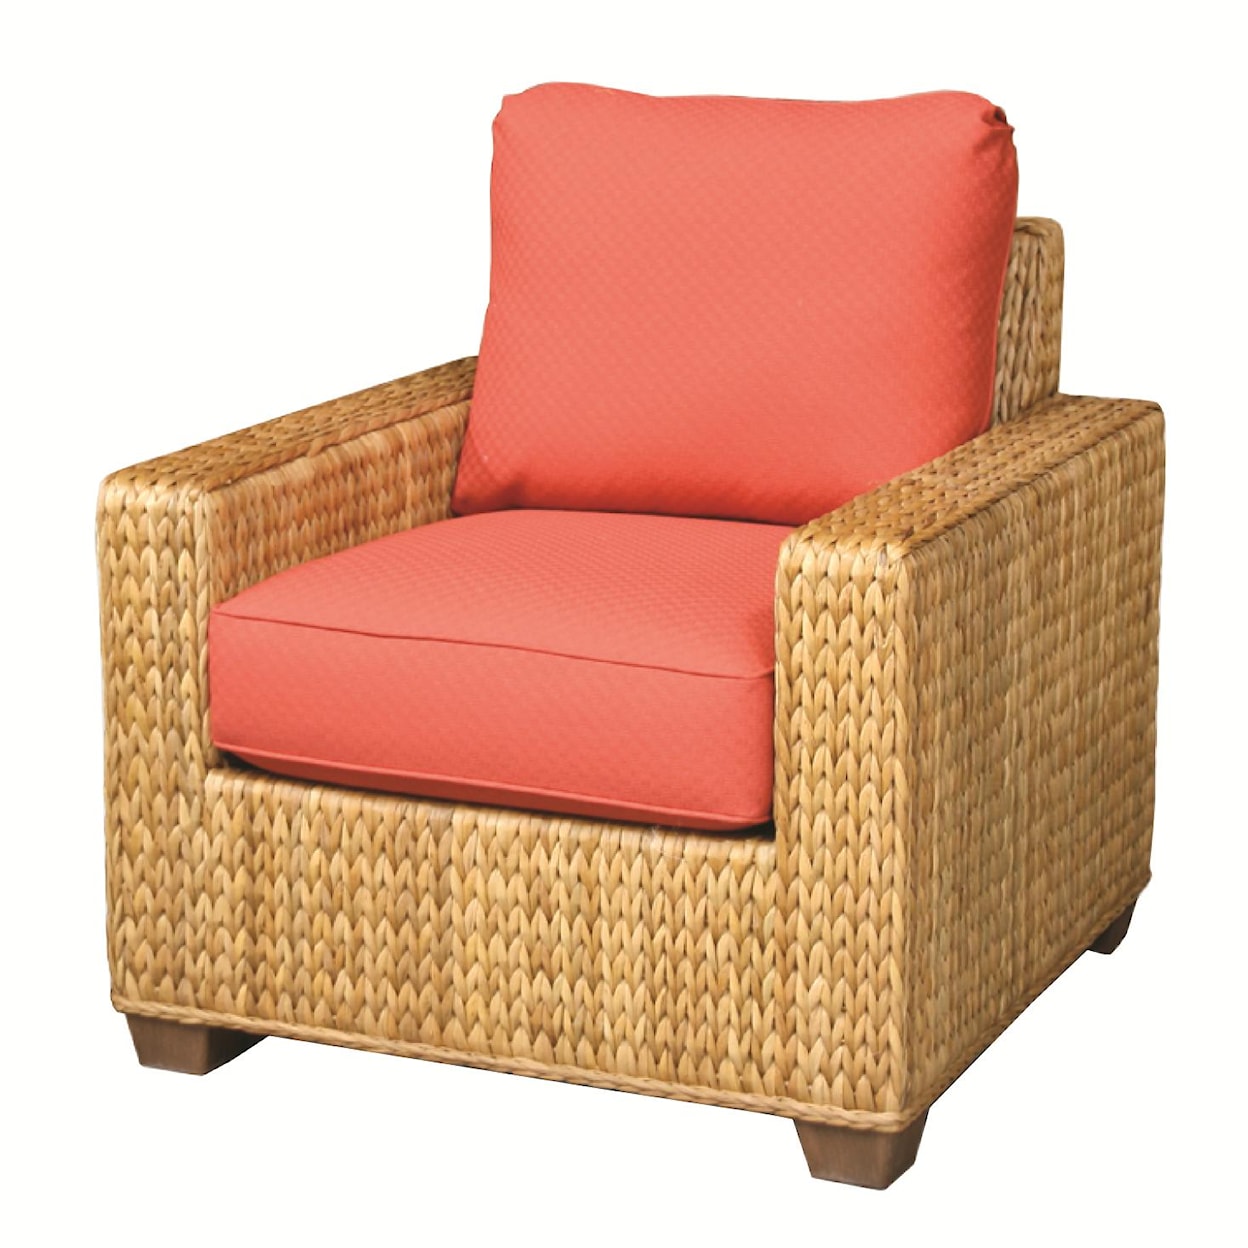 Capris Furniture Chairs and Ottomans Woven Wicker Chair